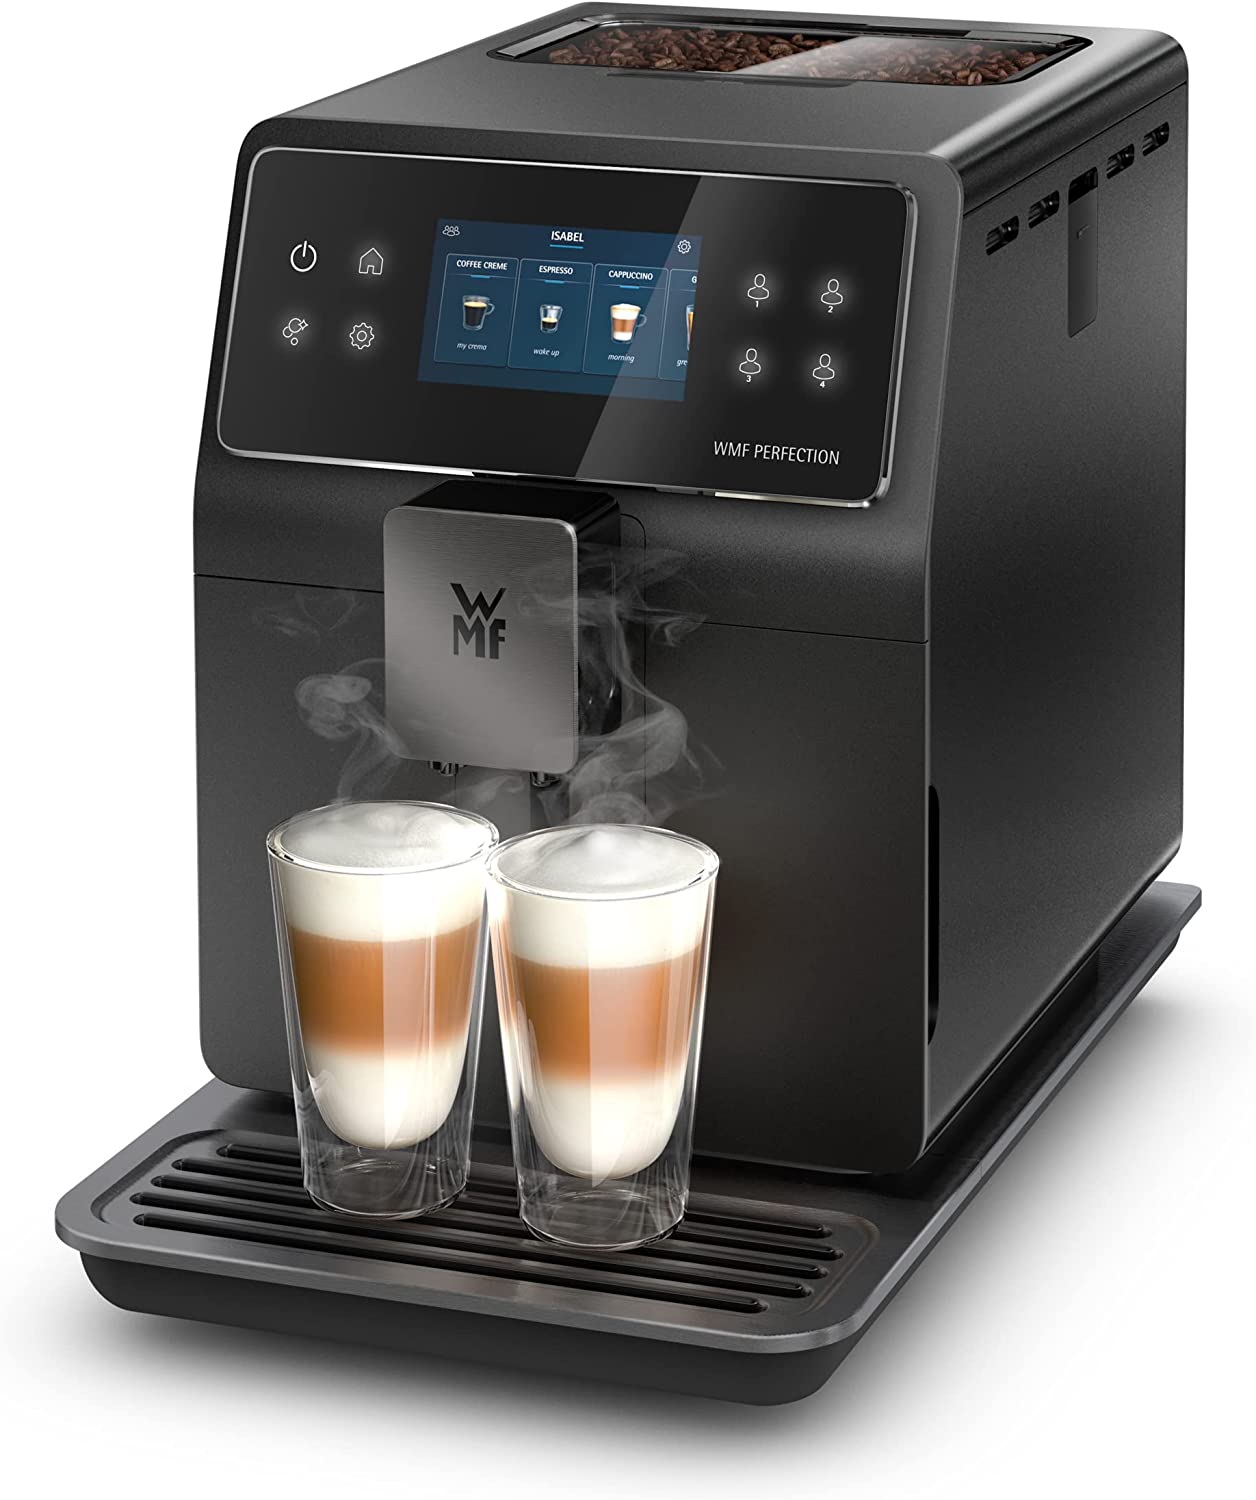 WMF Perfection 740L Fully Automatic Coffee Machine with Milk System, 15 Drink Specialities, Double Thermal Block, Stainless Steel Grinder, User Profile Storage